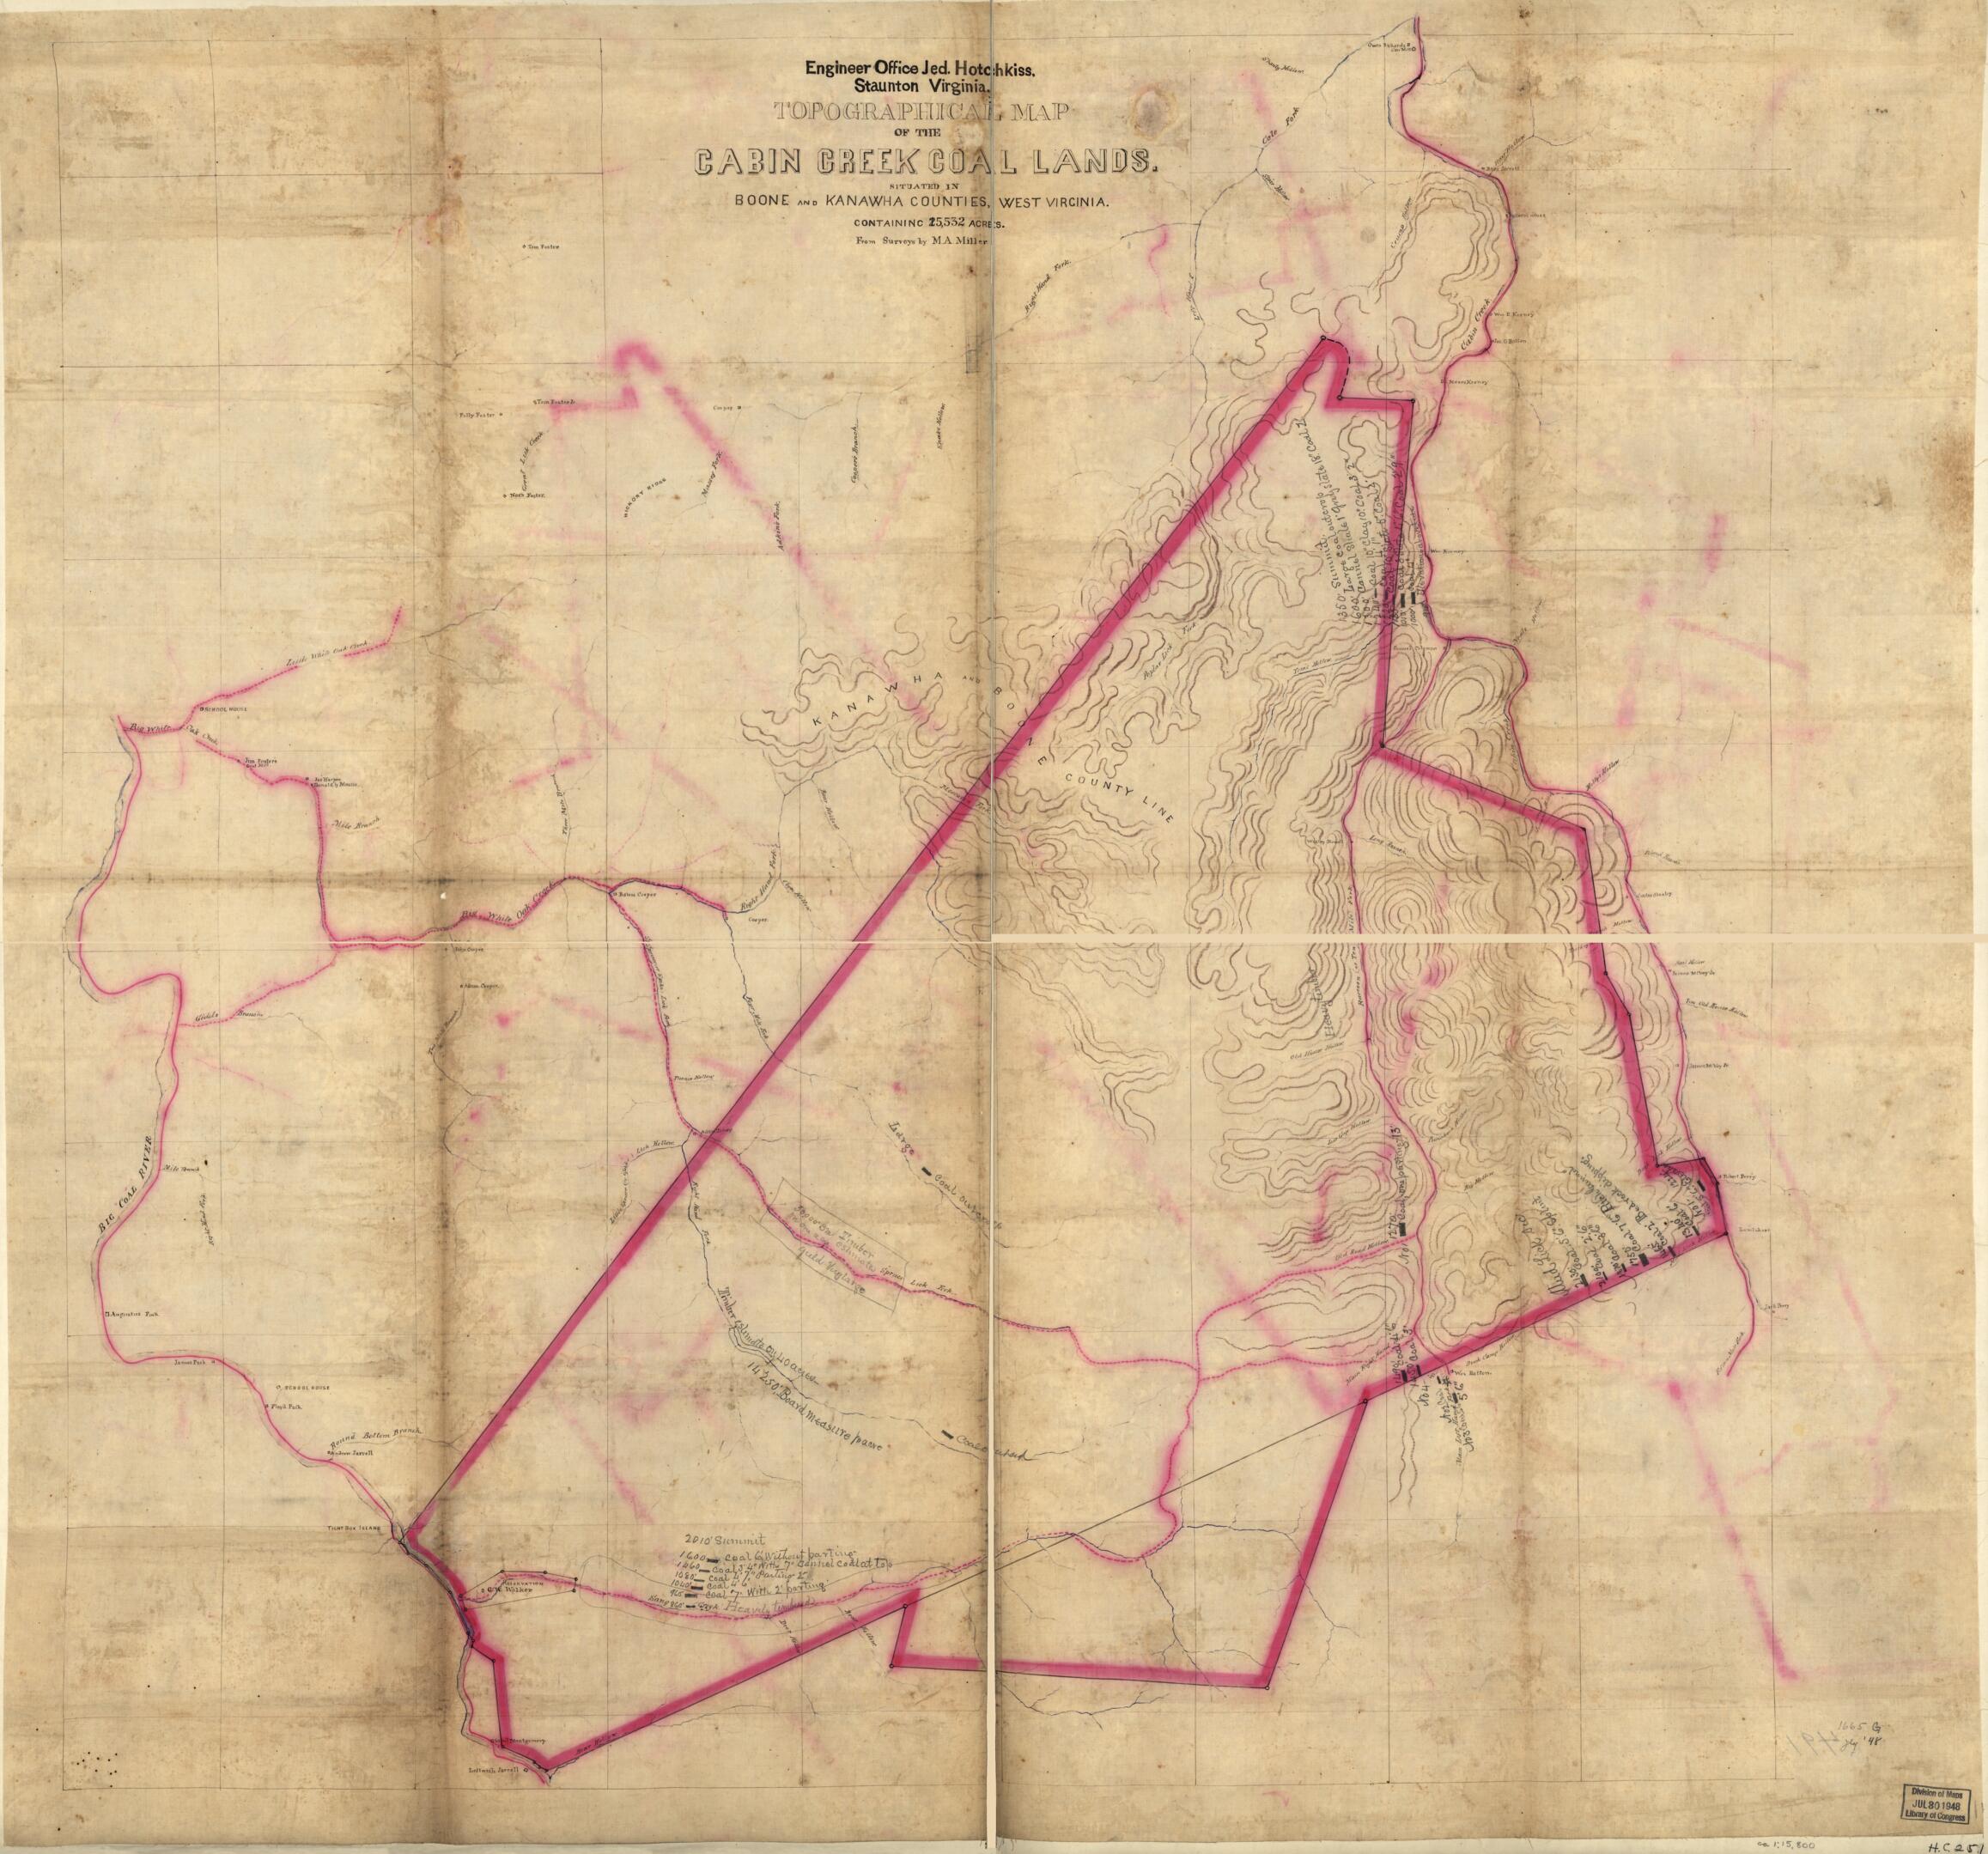 This old map of Topographical Map of the Cabin Creek Coal Lands, Situated In Boone and Kanawha Counties, West Virginia : Containing 15,532 Acres from 1880 was created by Jedediah Hotchkiss, M. A. Miller in 1880